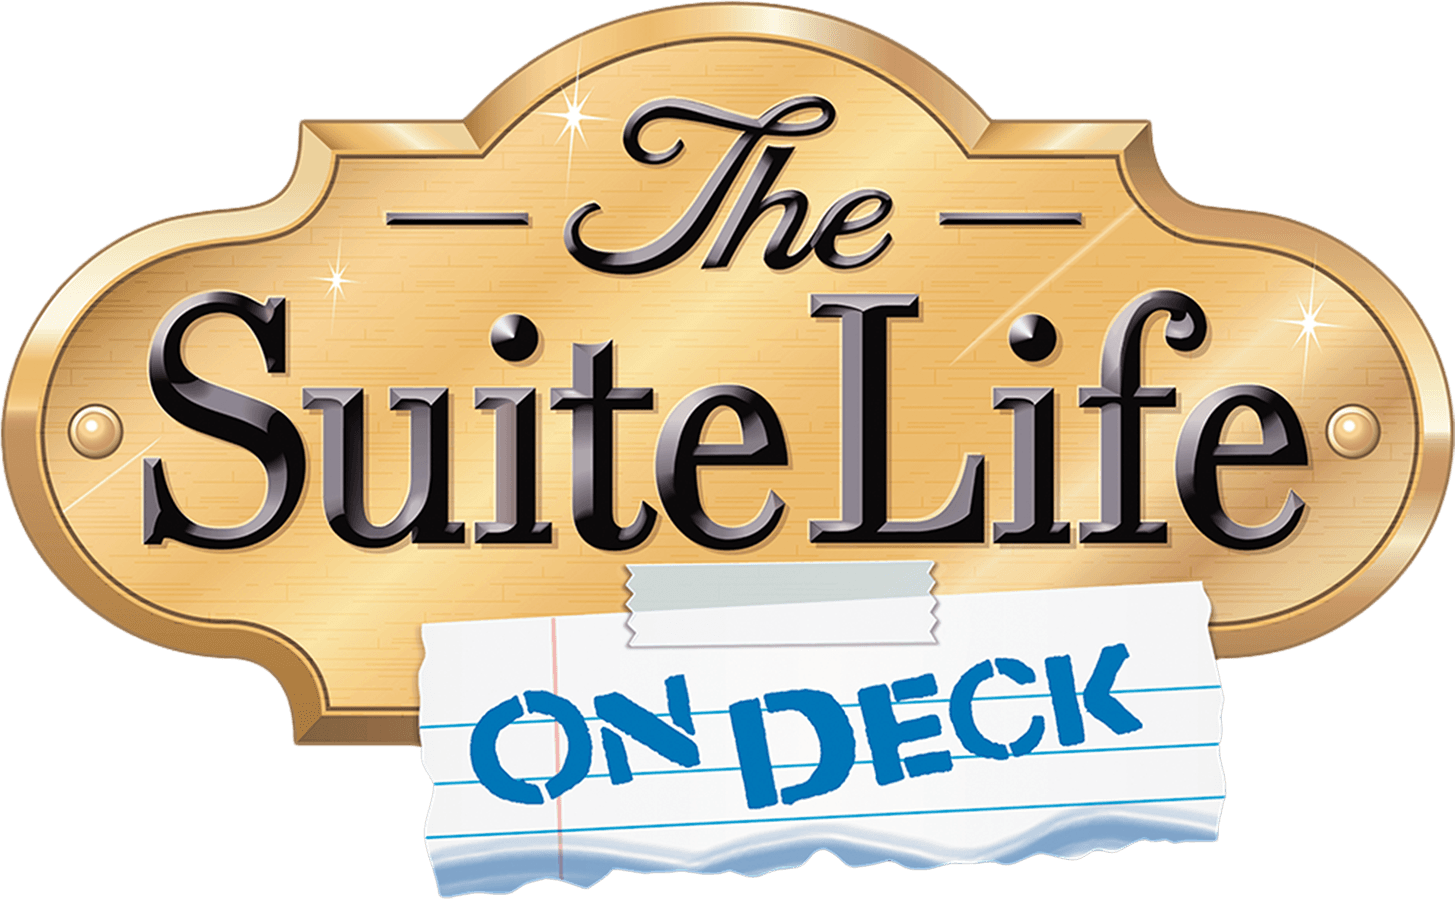 The Suite Life on Deck logo